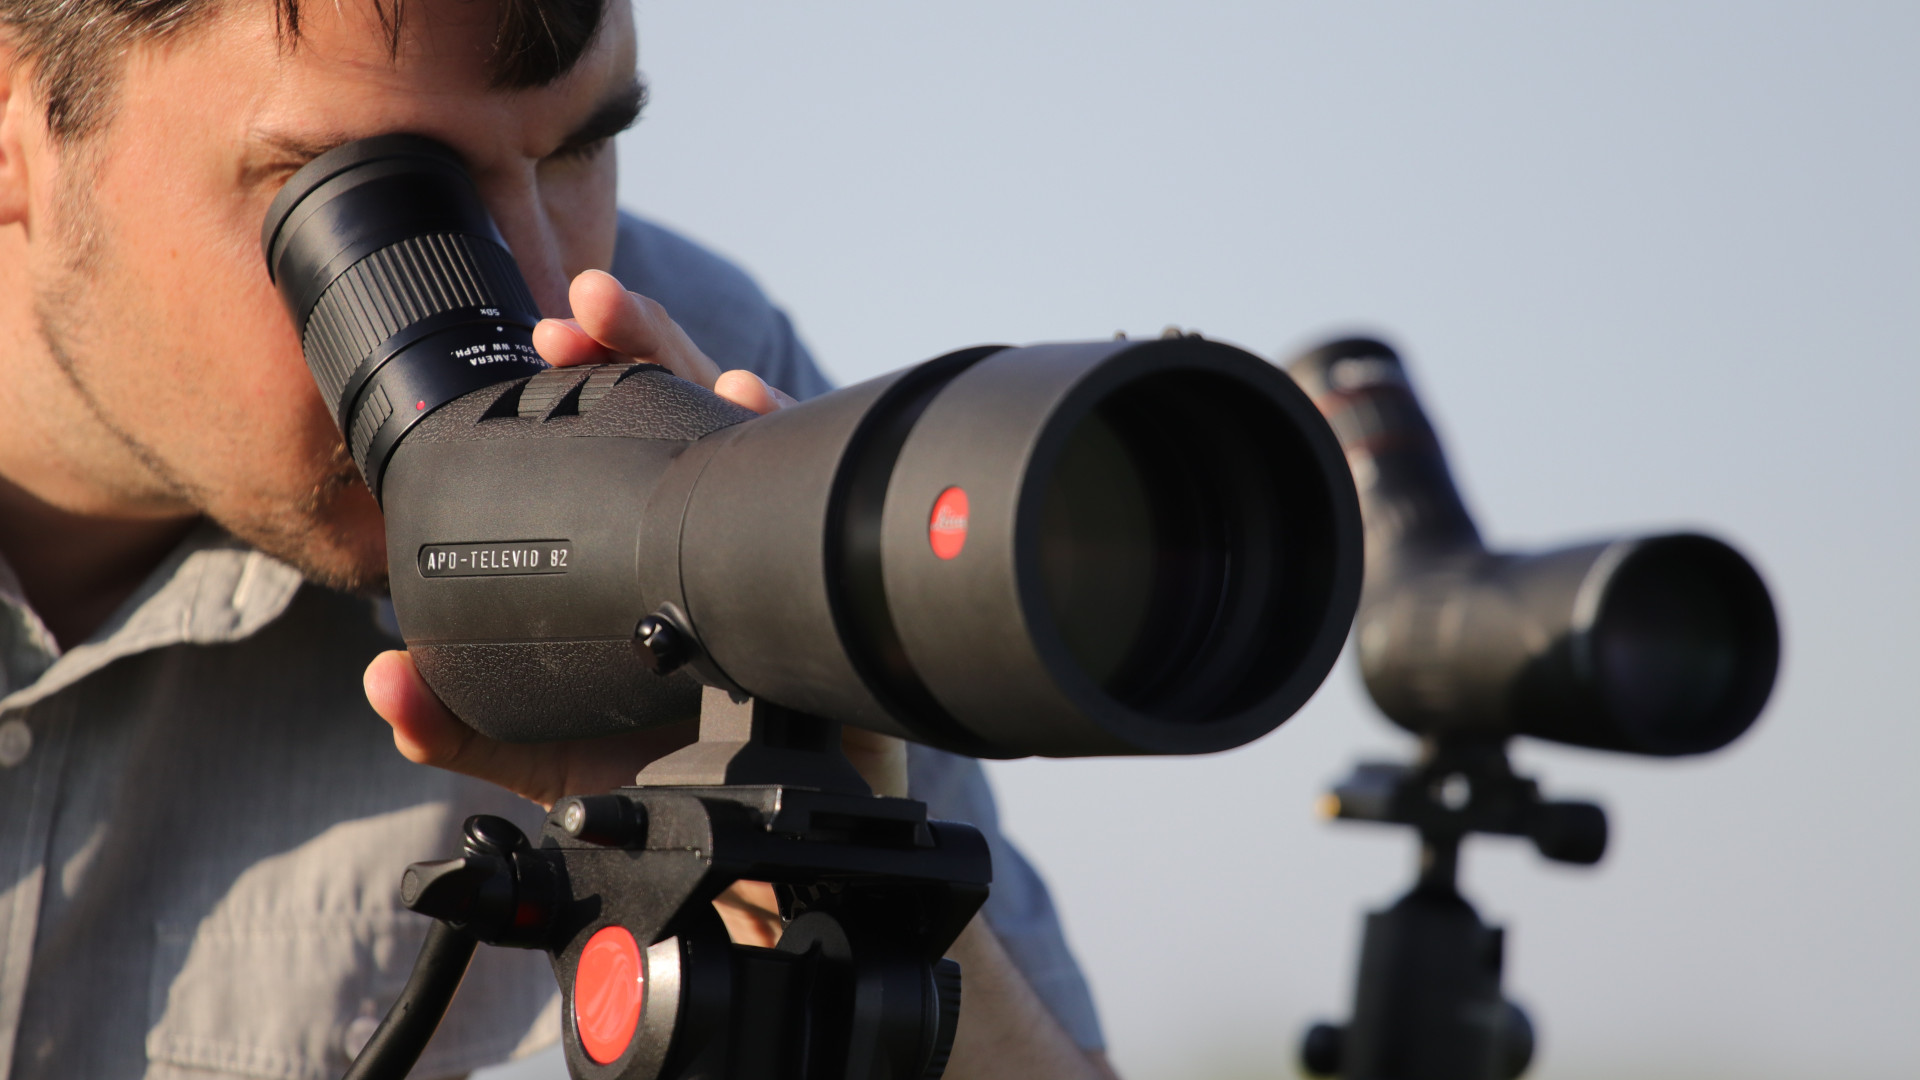 How much do I need to spend on a good spotting scope?